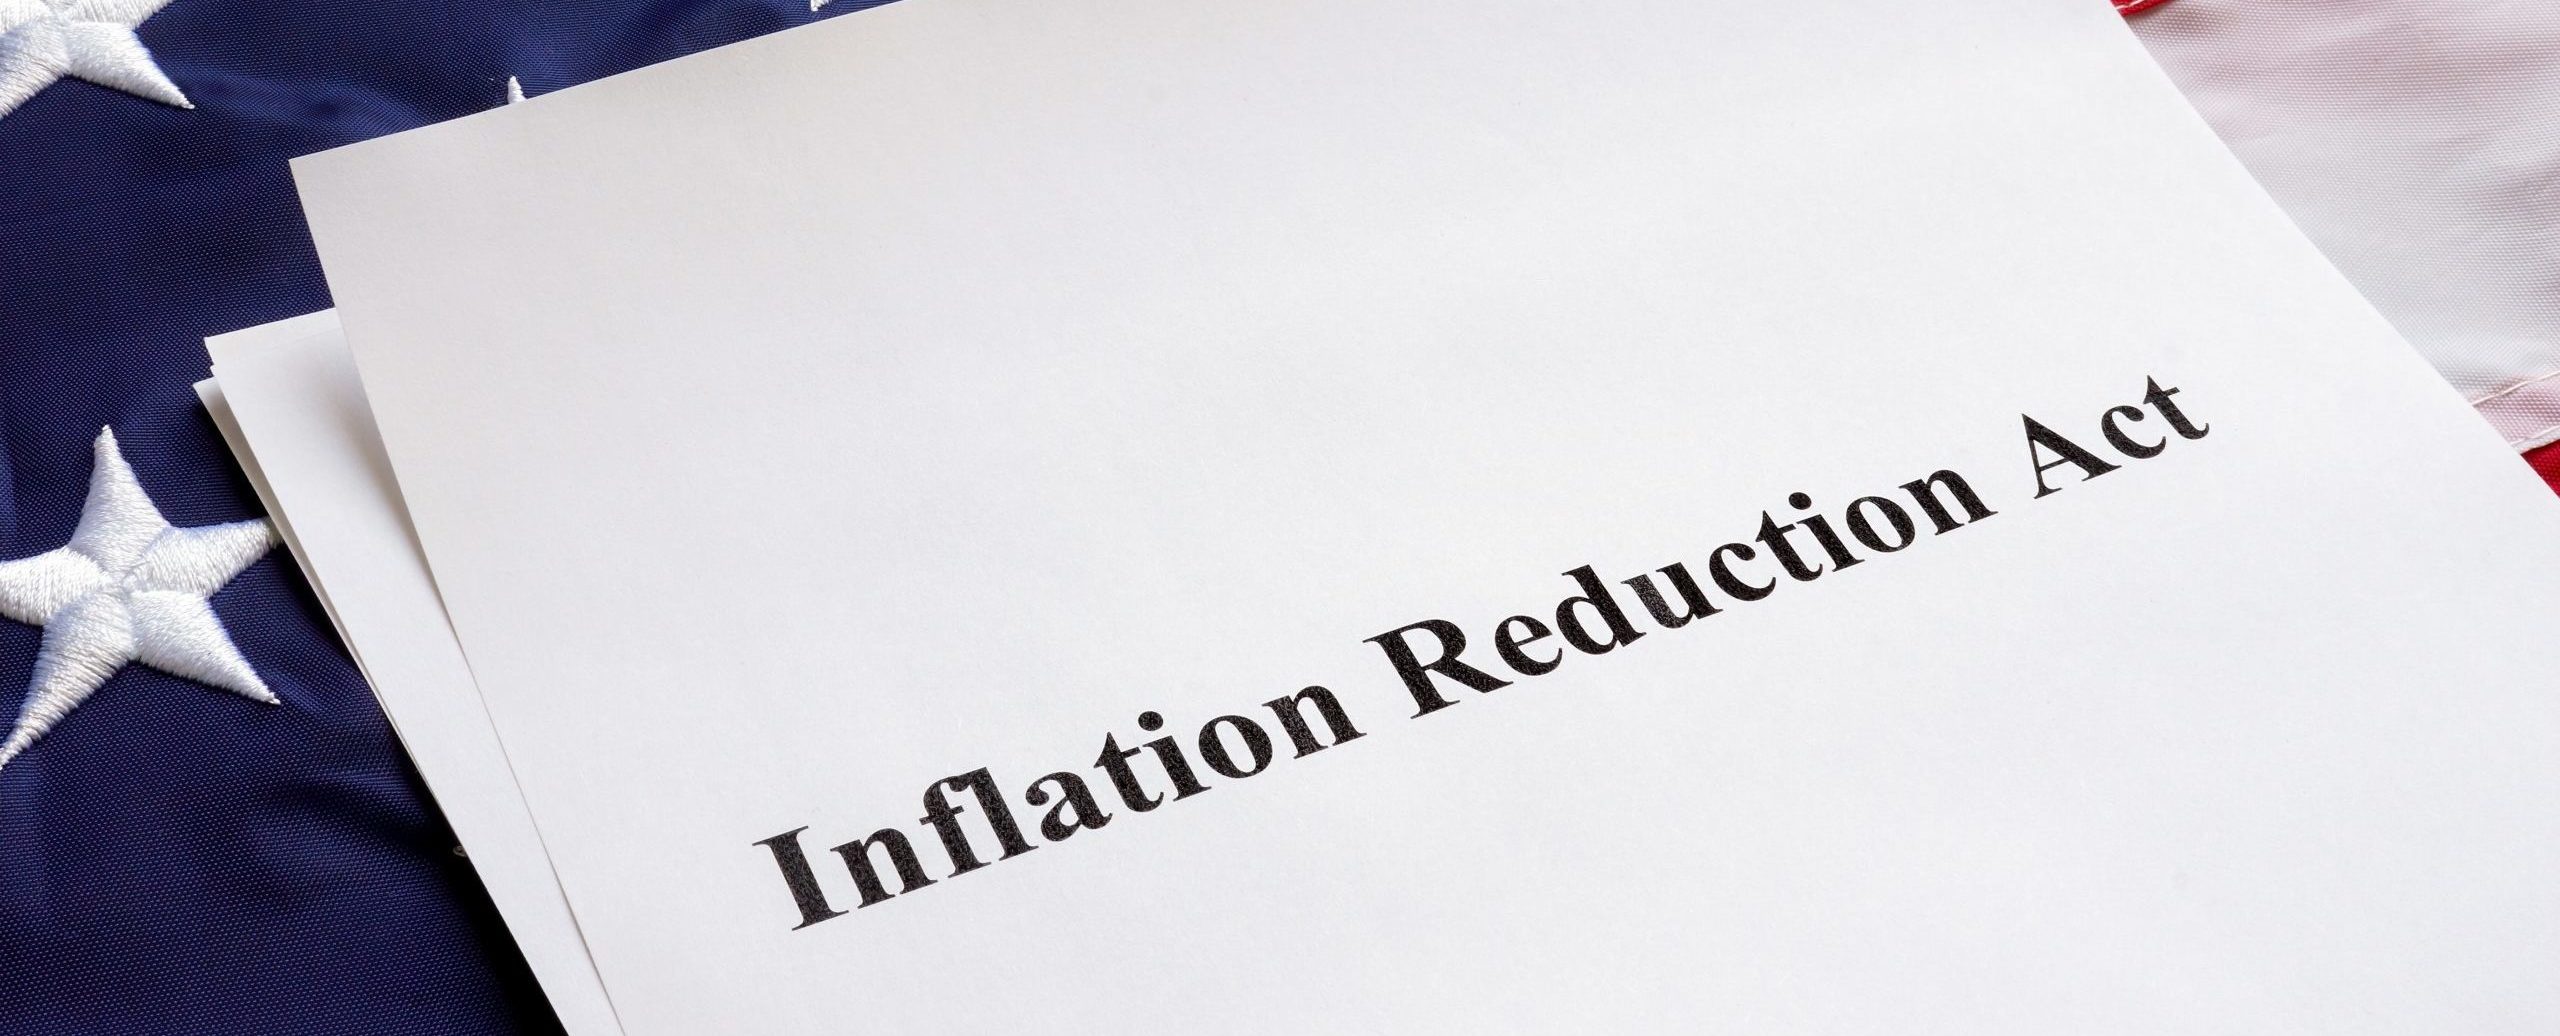 Inflation Reduction Act Signed by President Biden National Health Council